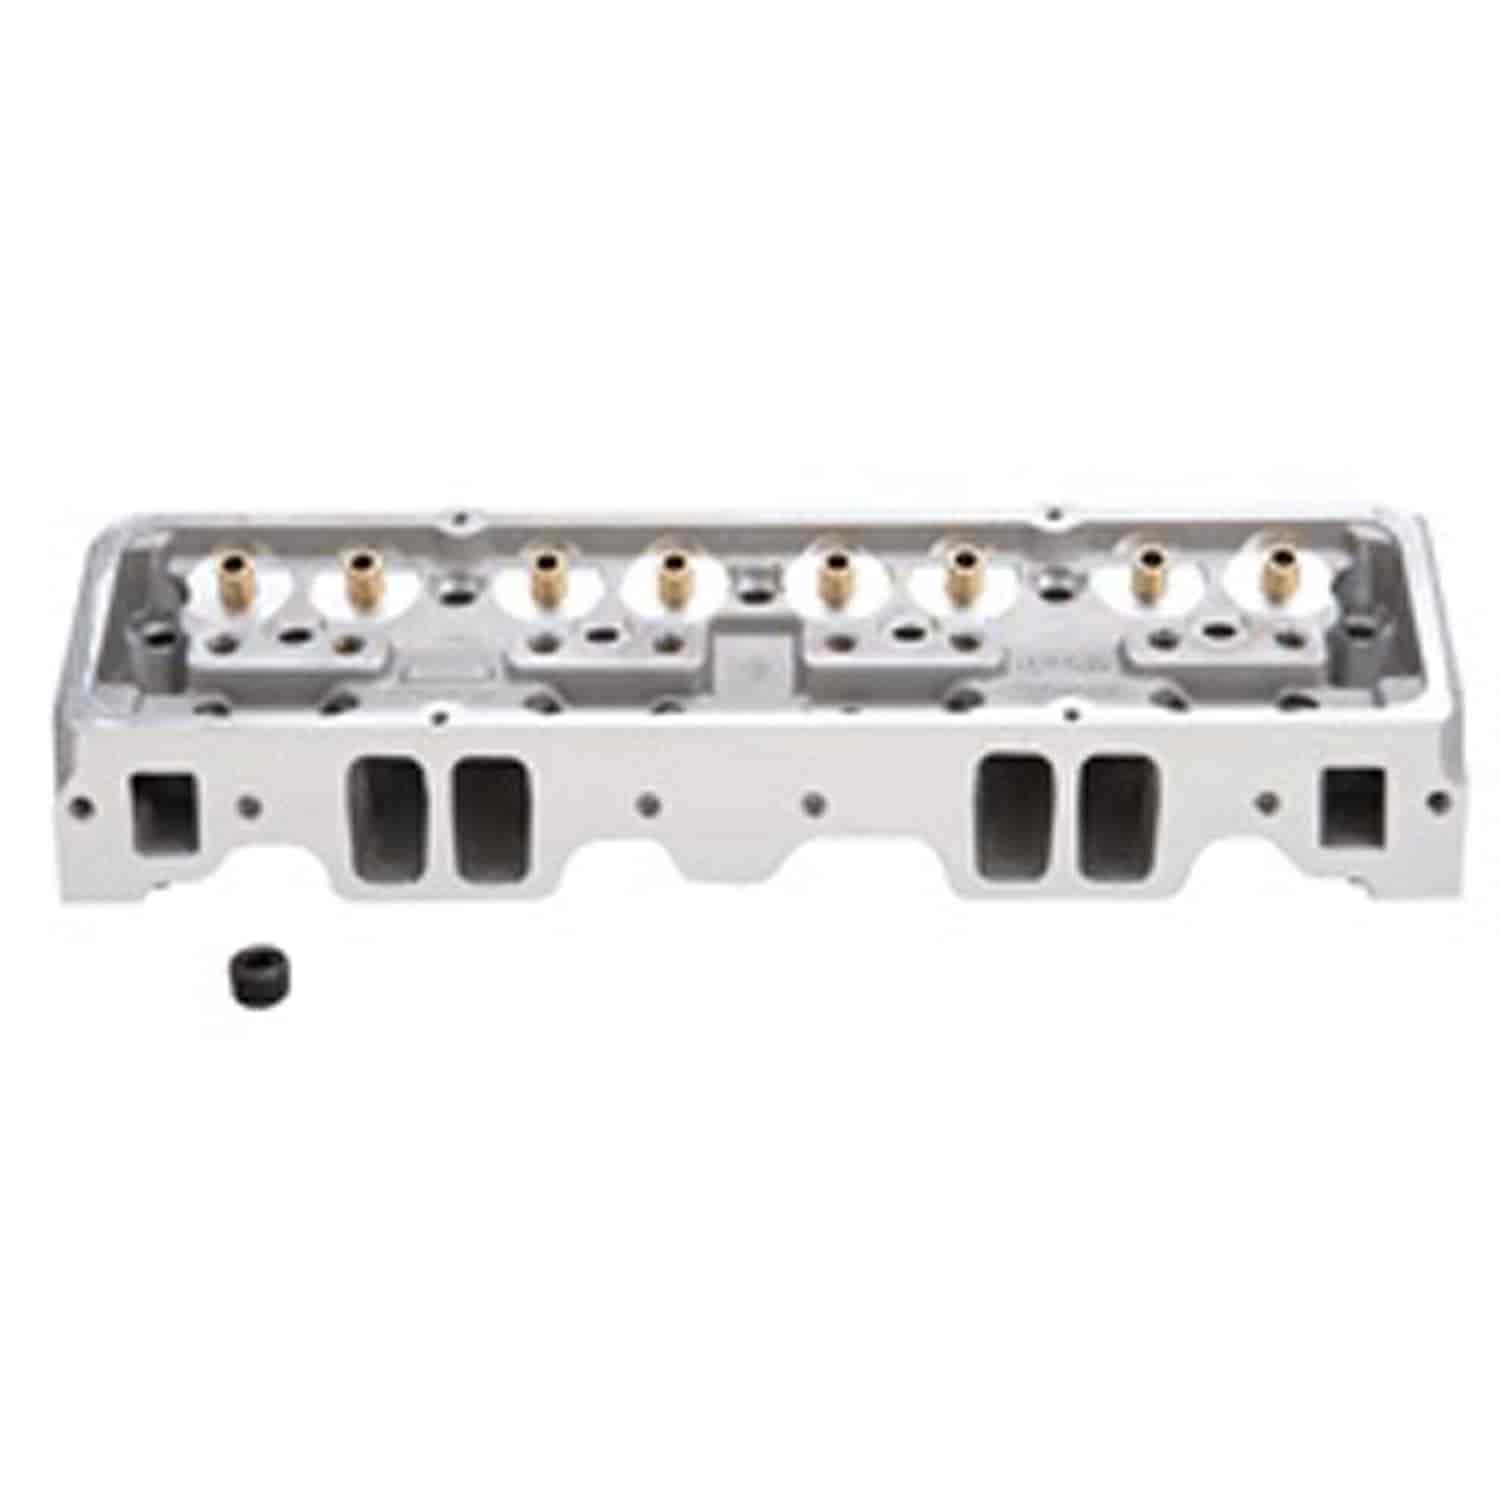 NHRA Perfromer RPM Cylinder Heads for Small Block